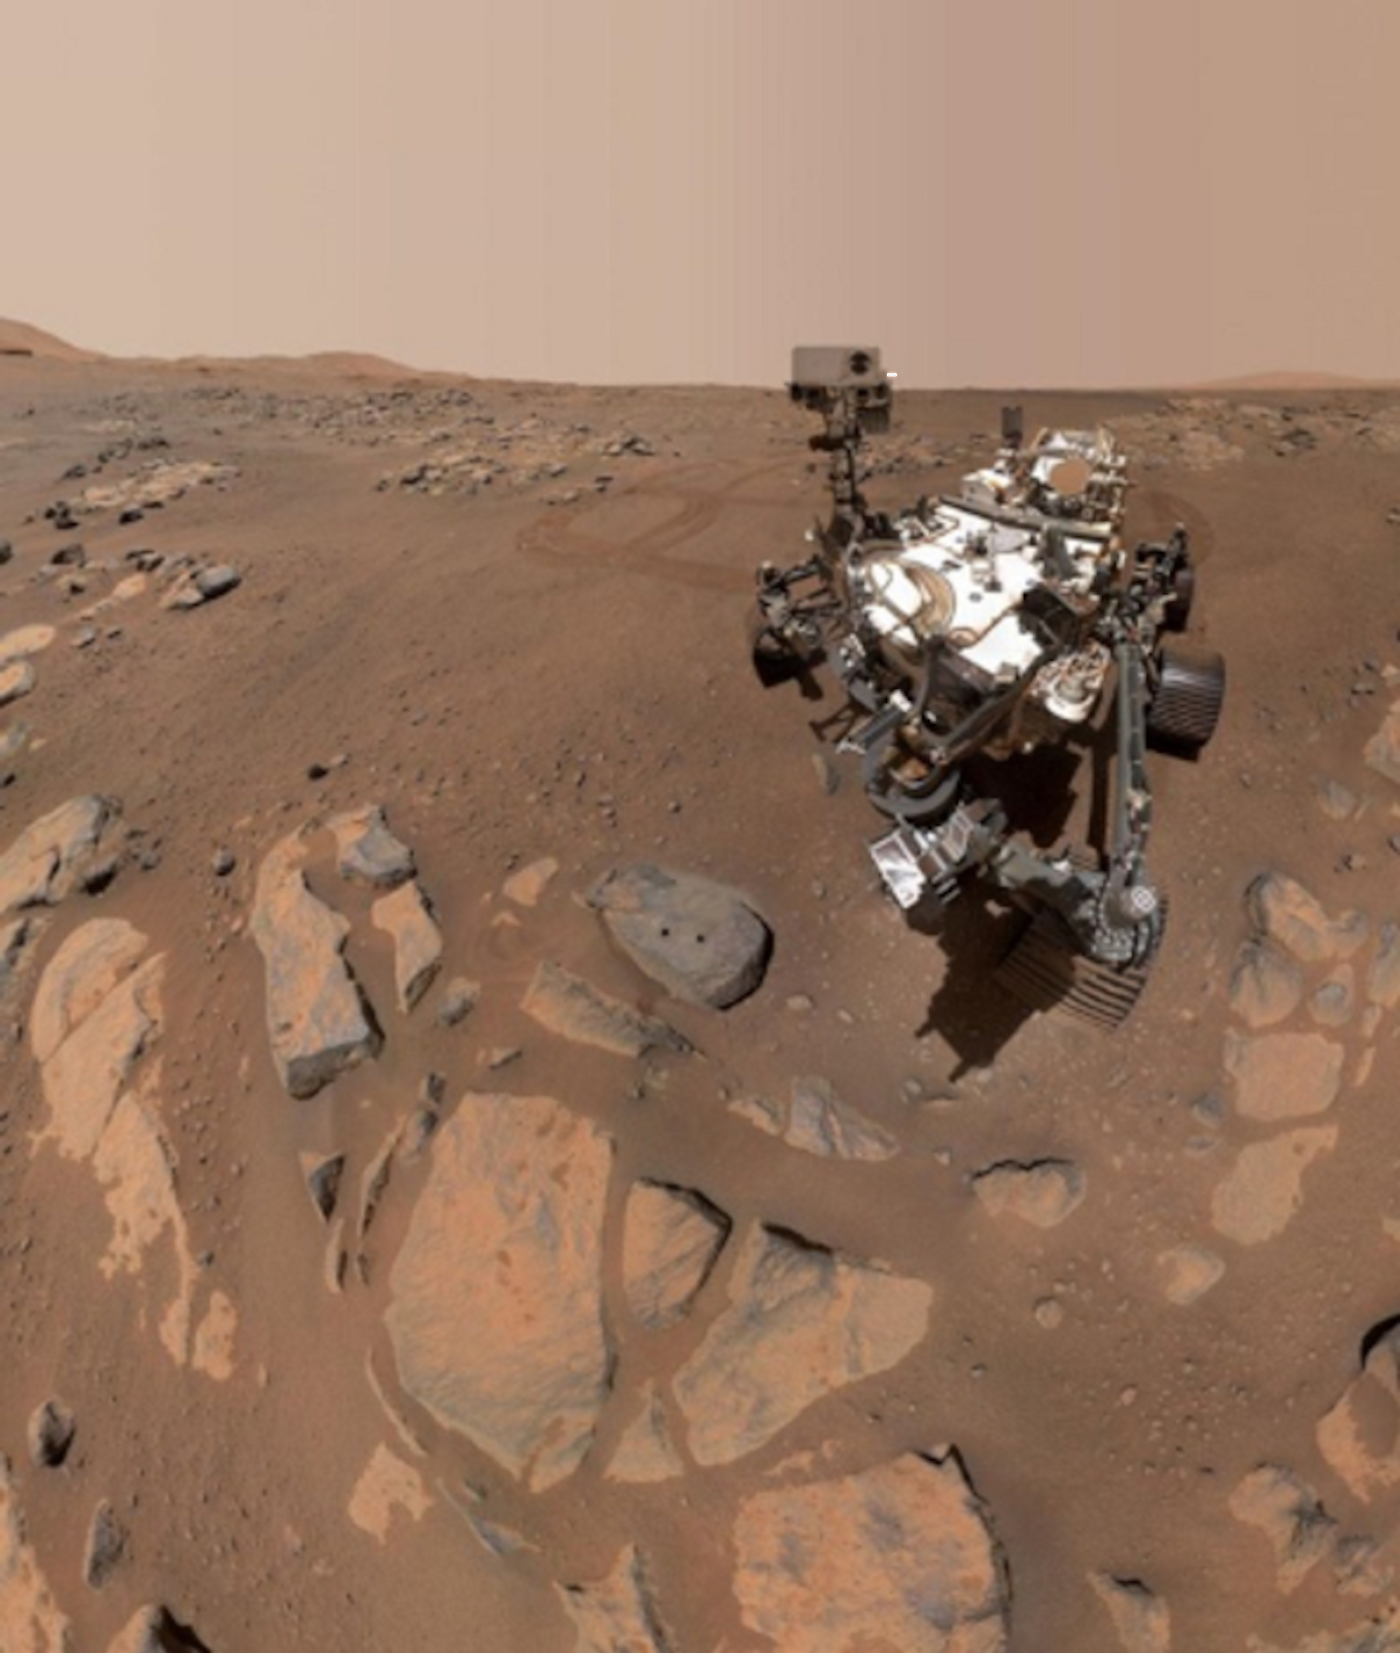 Perseverance rover taking a selfie over the rock it collected two core samples from on Mars. /  Image credit: NASA/JPL-Caltech/MSSS.